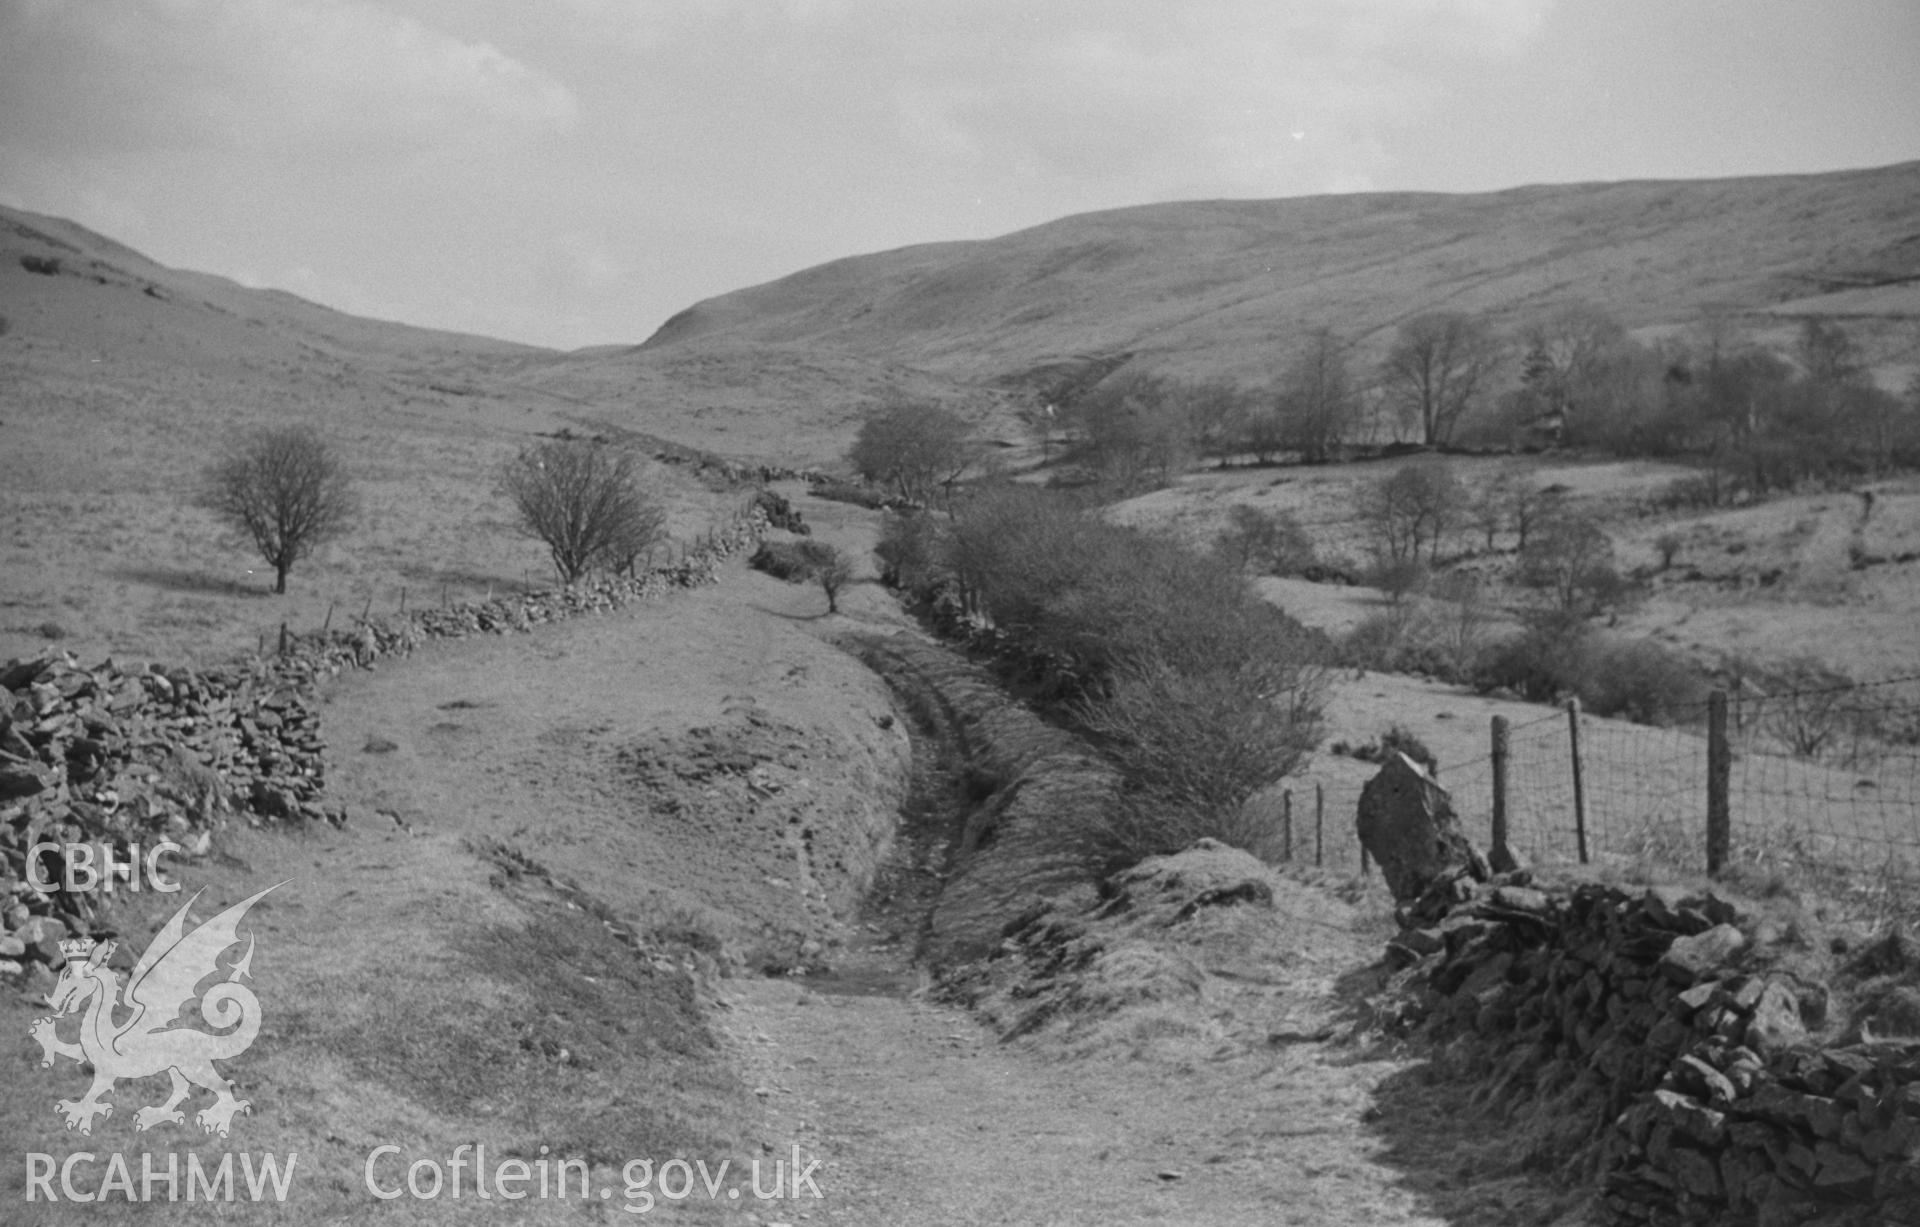 Black and White photograph showing view up the old track between high banks at 925ft. Photographed by Arthur Chater in April 1962 from Grid Reference SN 720 604, looking south east.